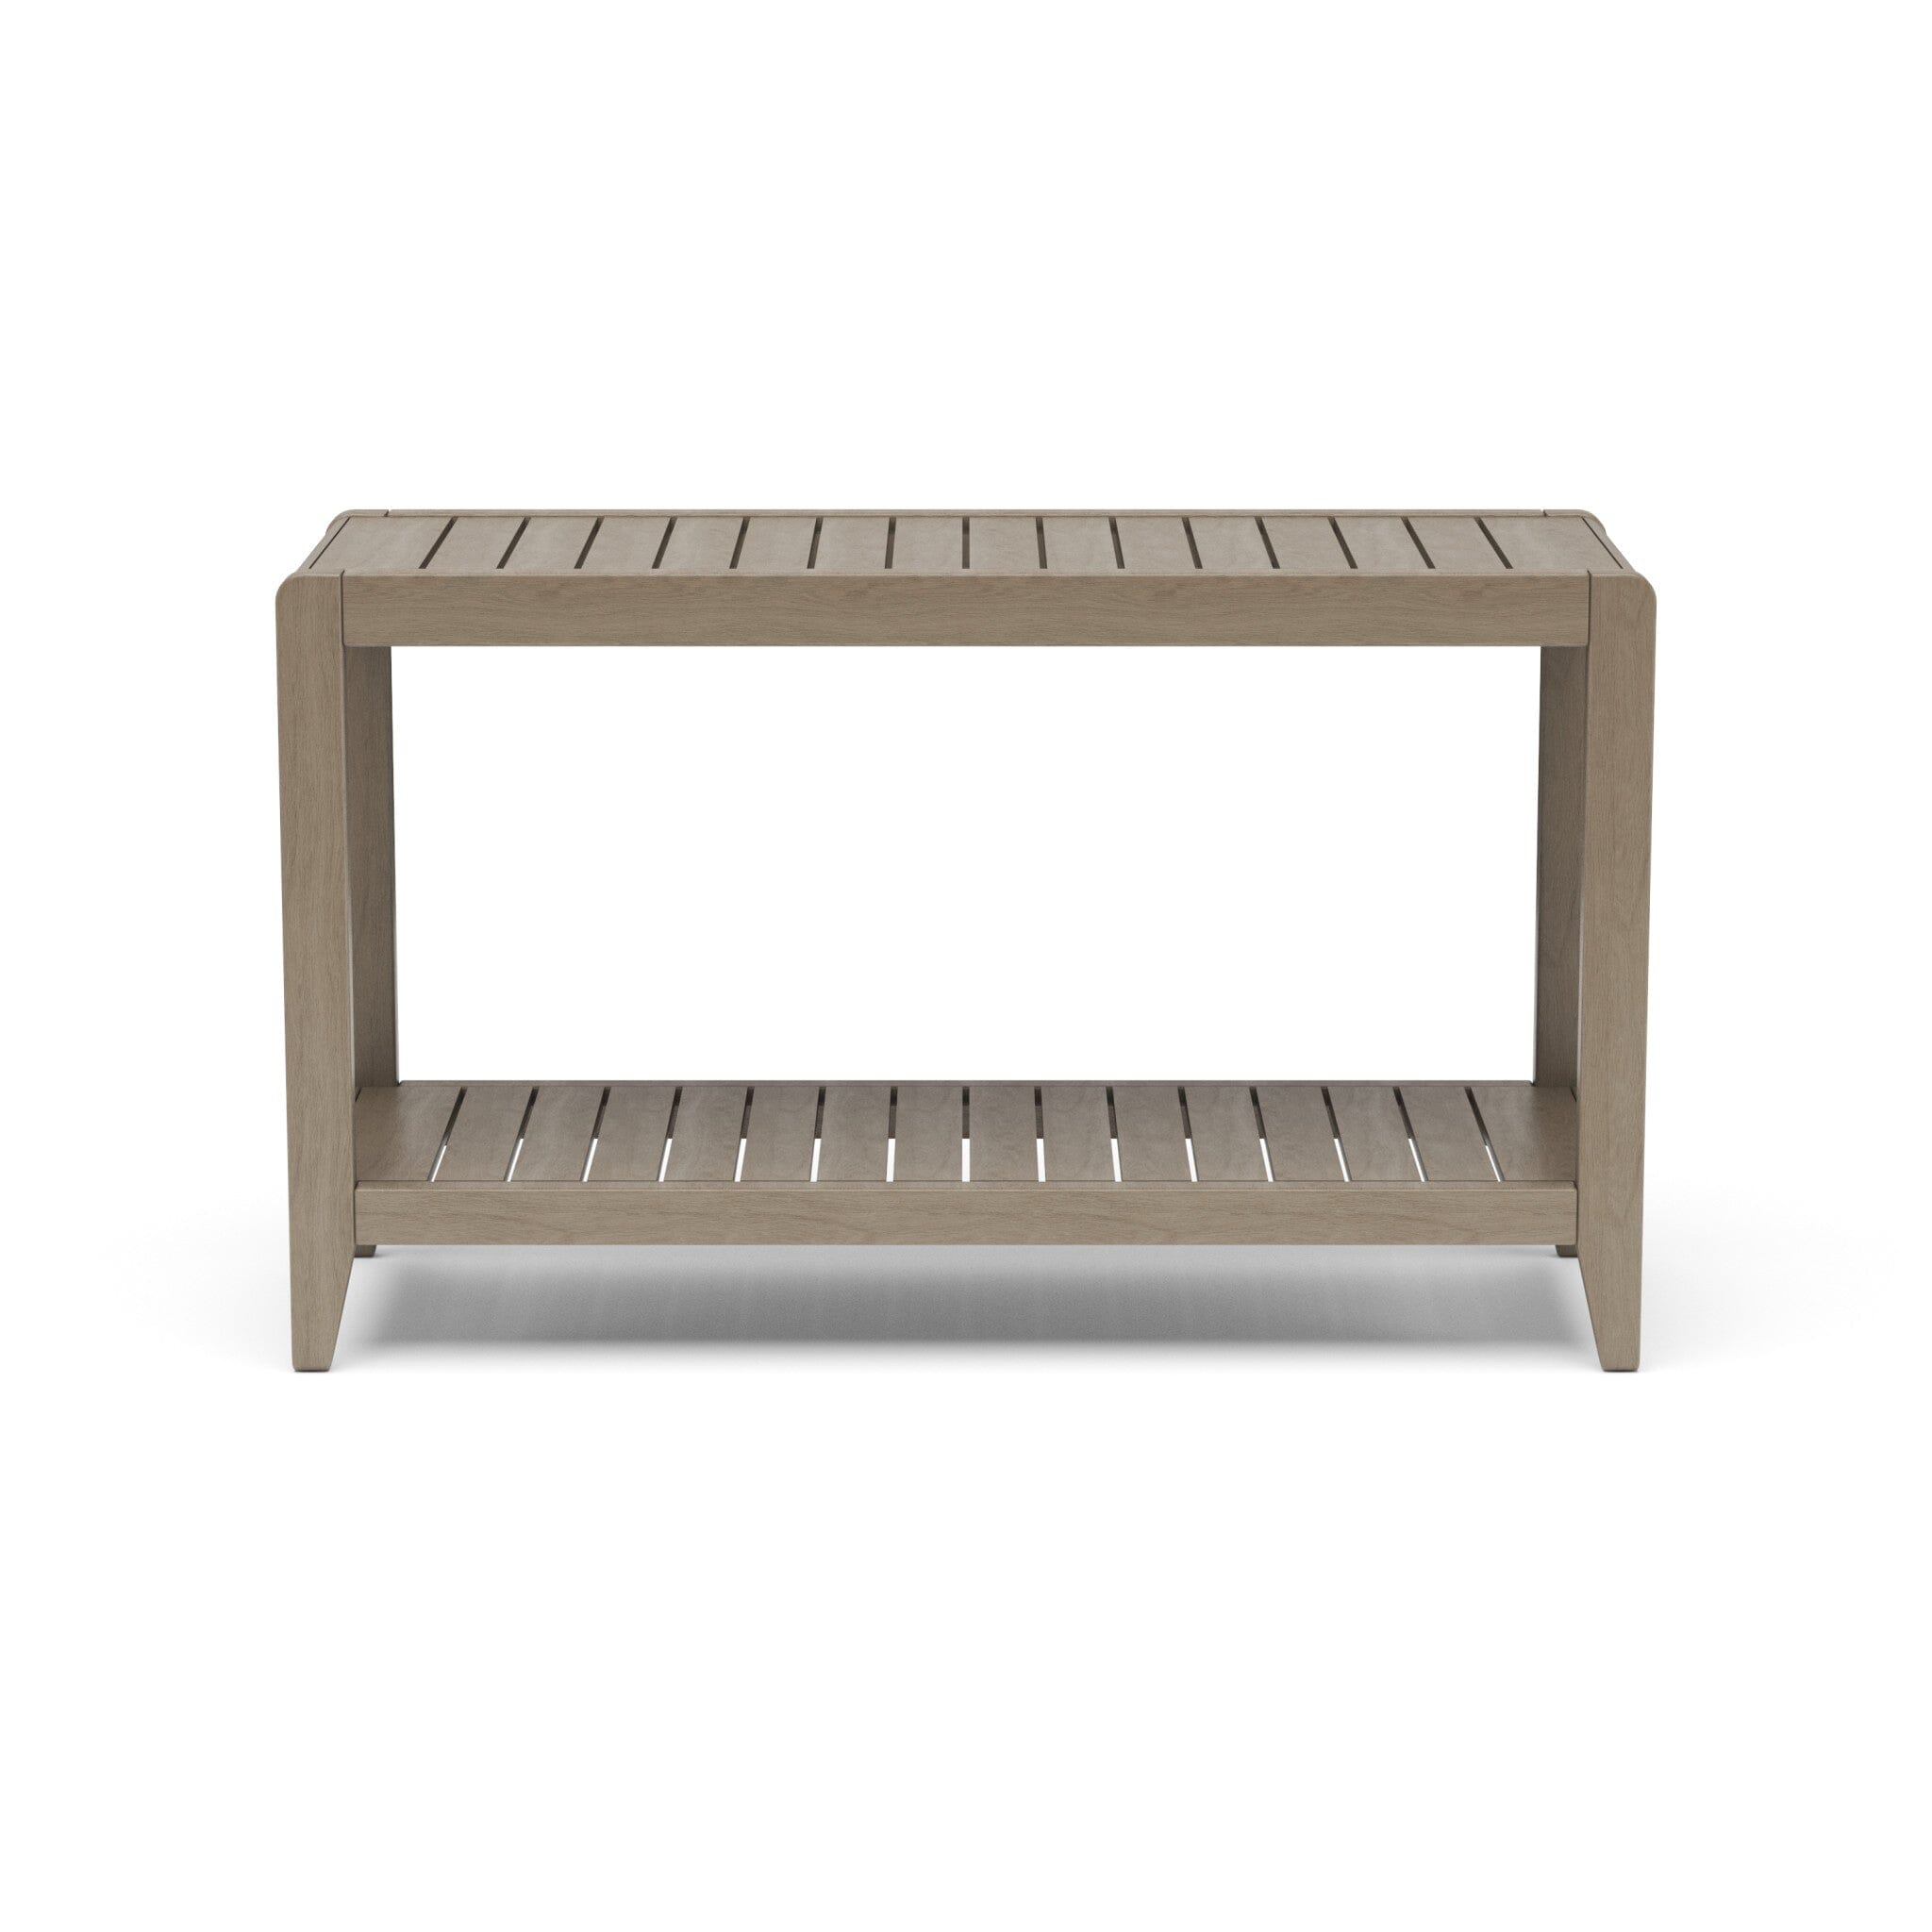 Transitional Outdoor Sofa Table By Sustain Outdoor Sofa Table Sustain